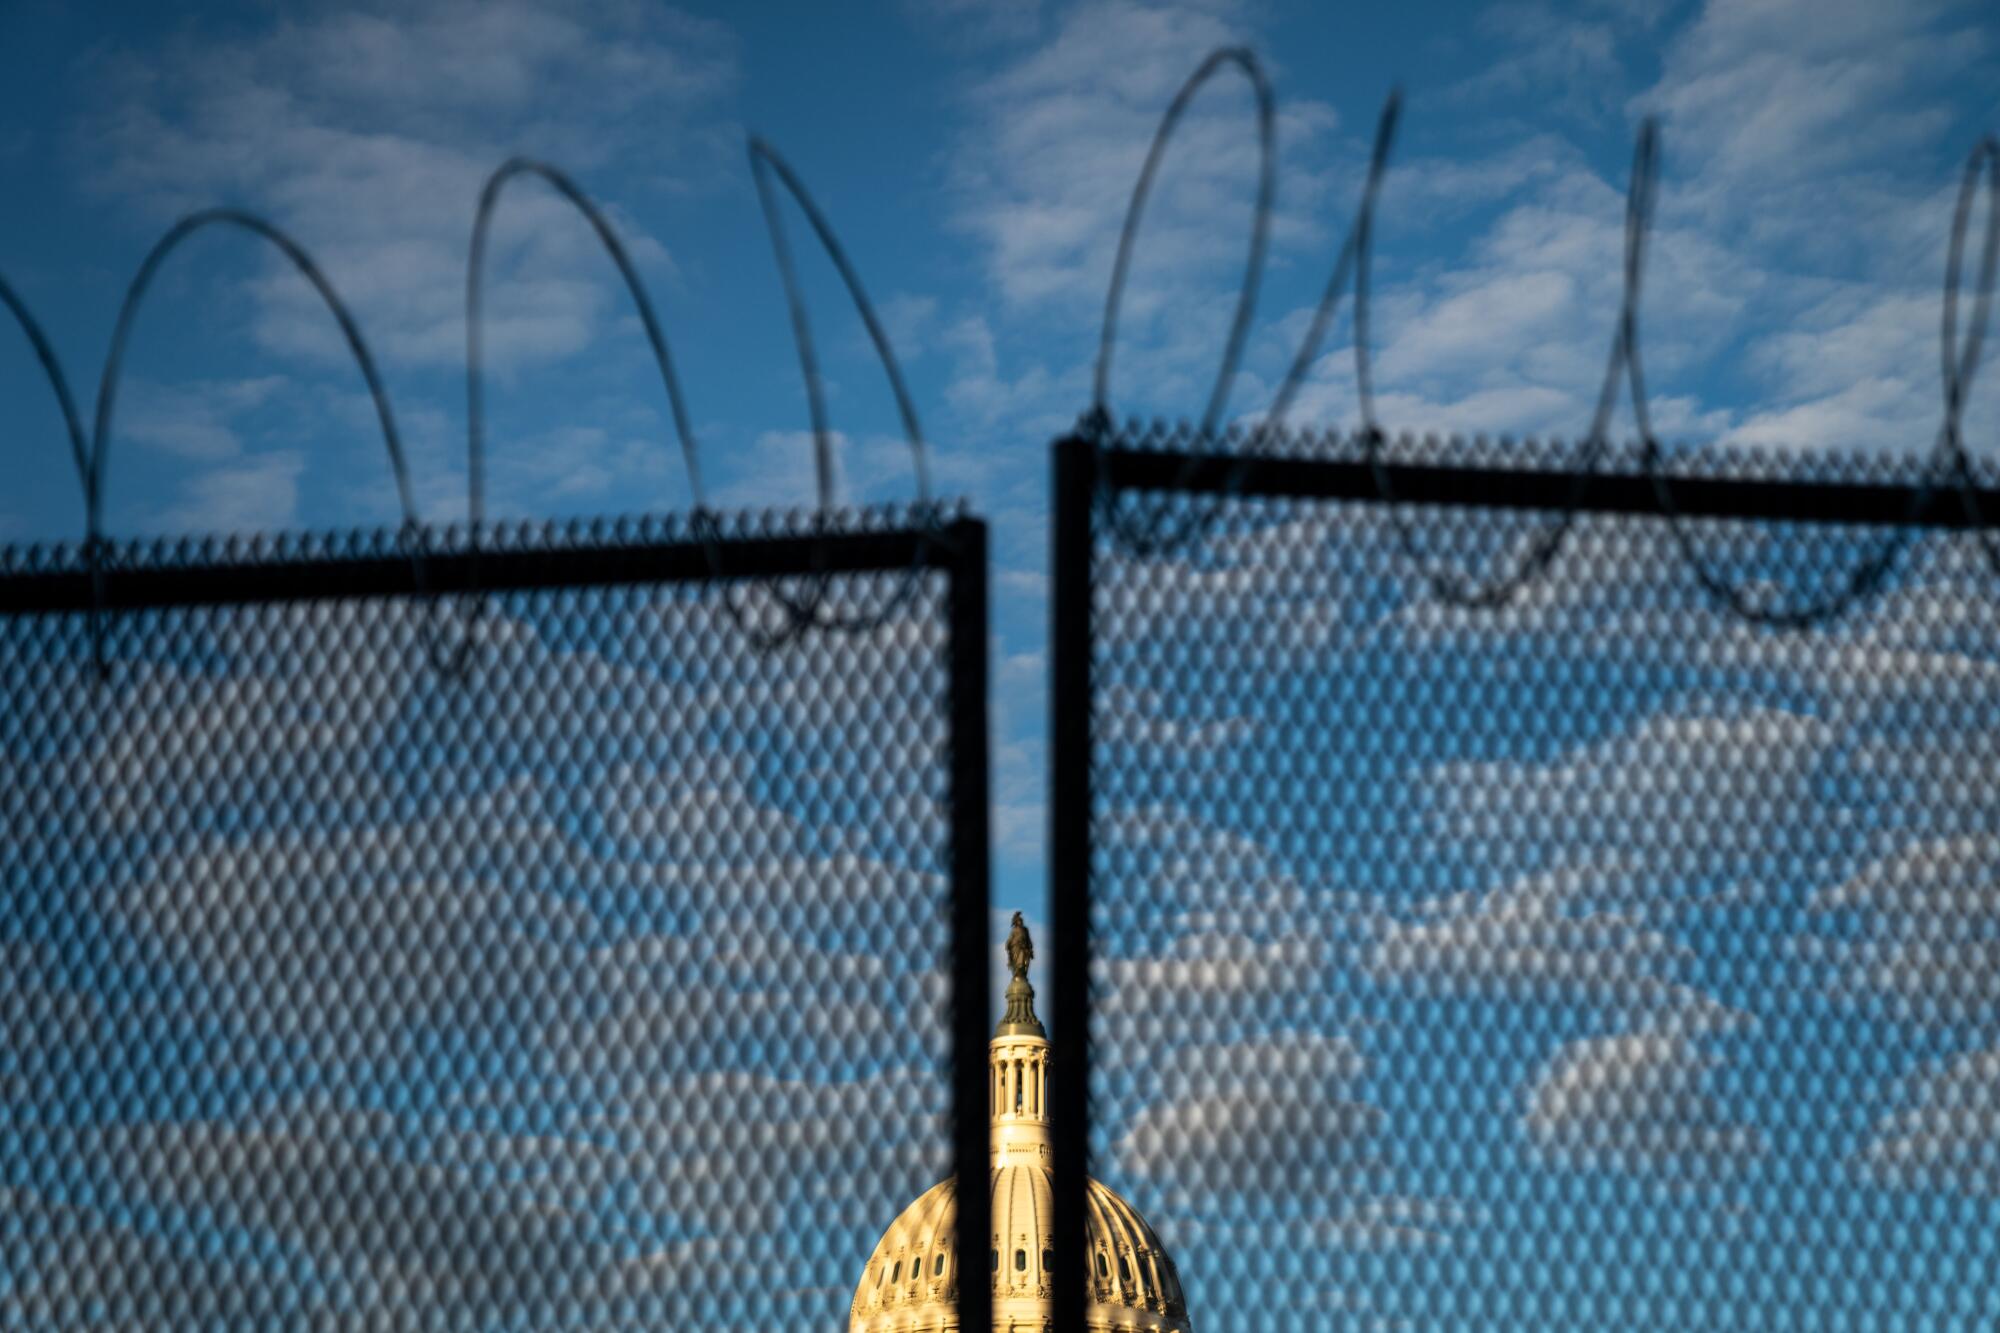  Barbed wire is seen atop security fencing, with the dome of the U.S. Capitol Building Saturday.